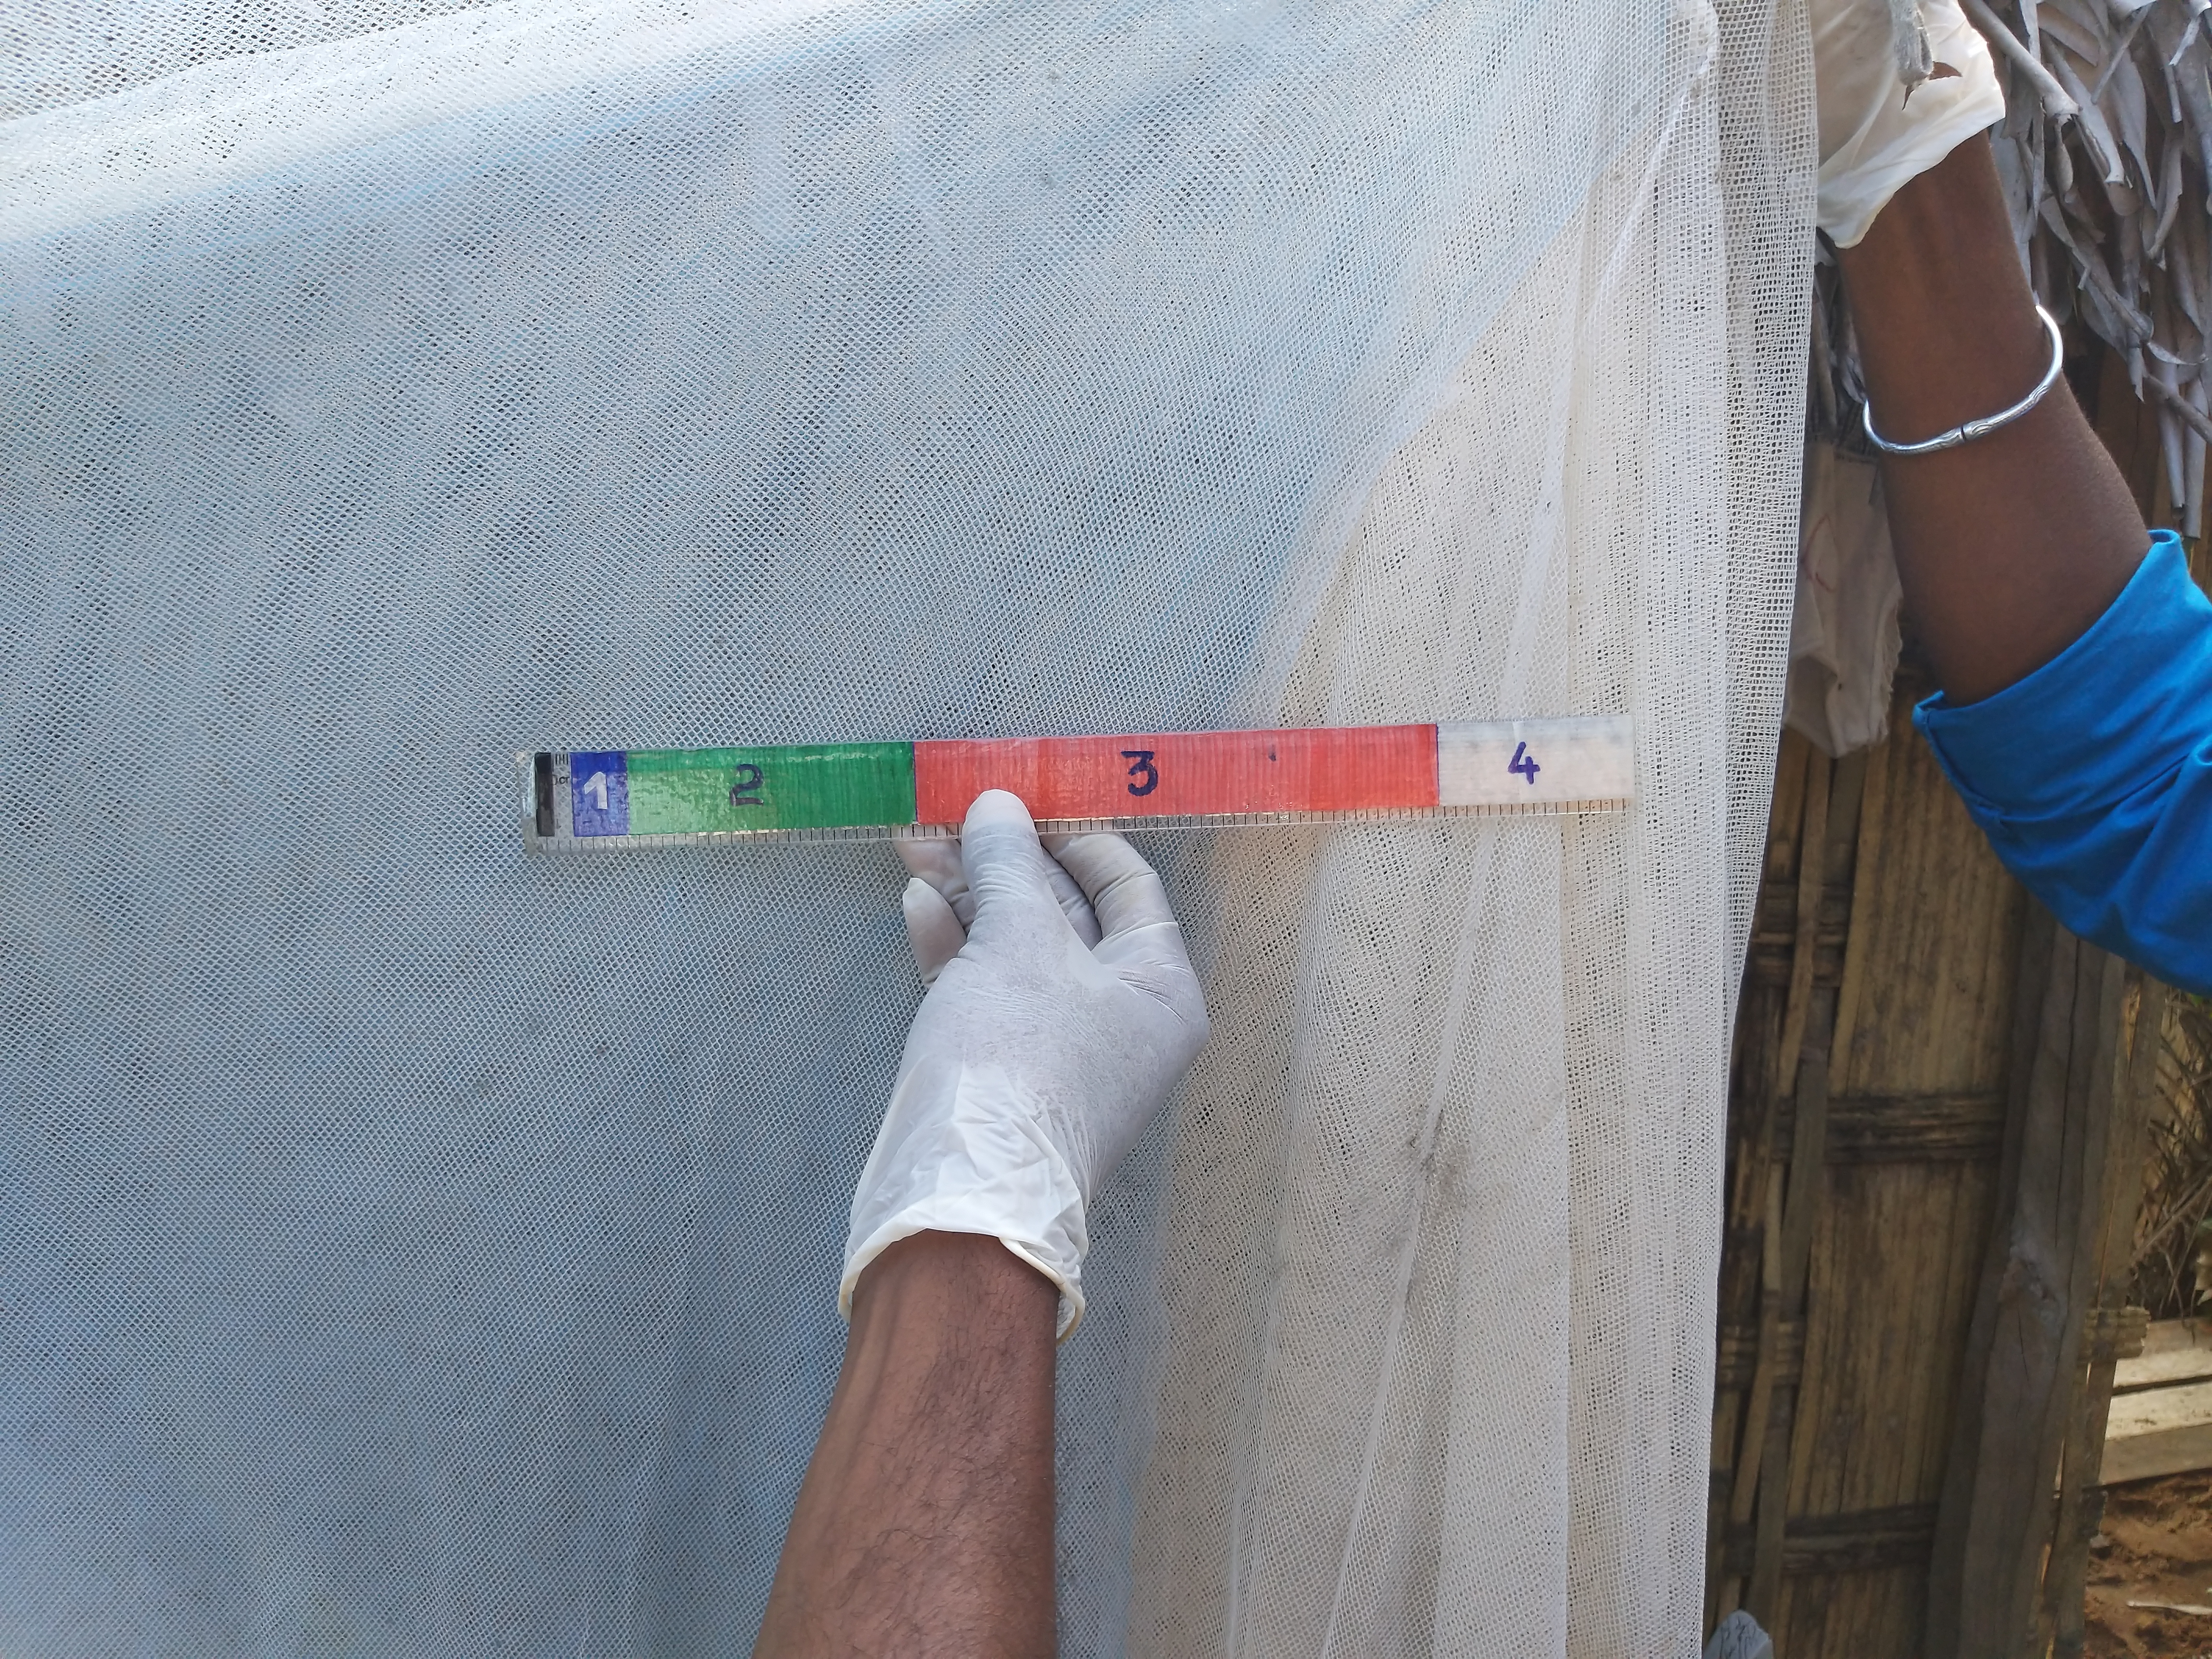 A ruler used to measure net hole size has color-coded markings for each of the four standard hole sizes measured during a durability monitoring study.